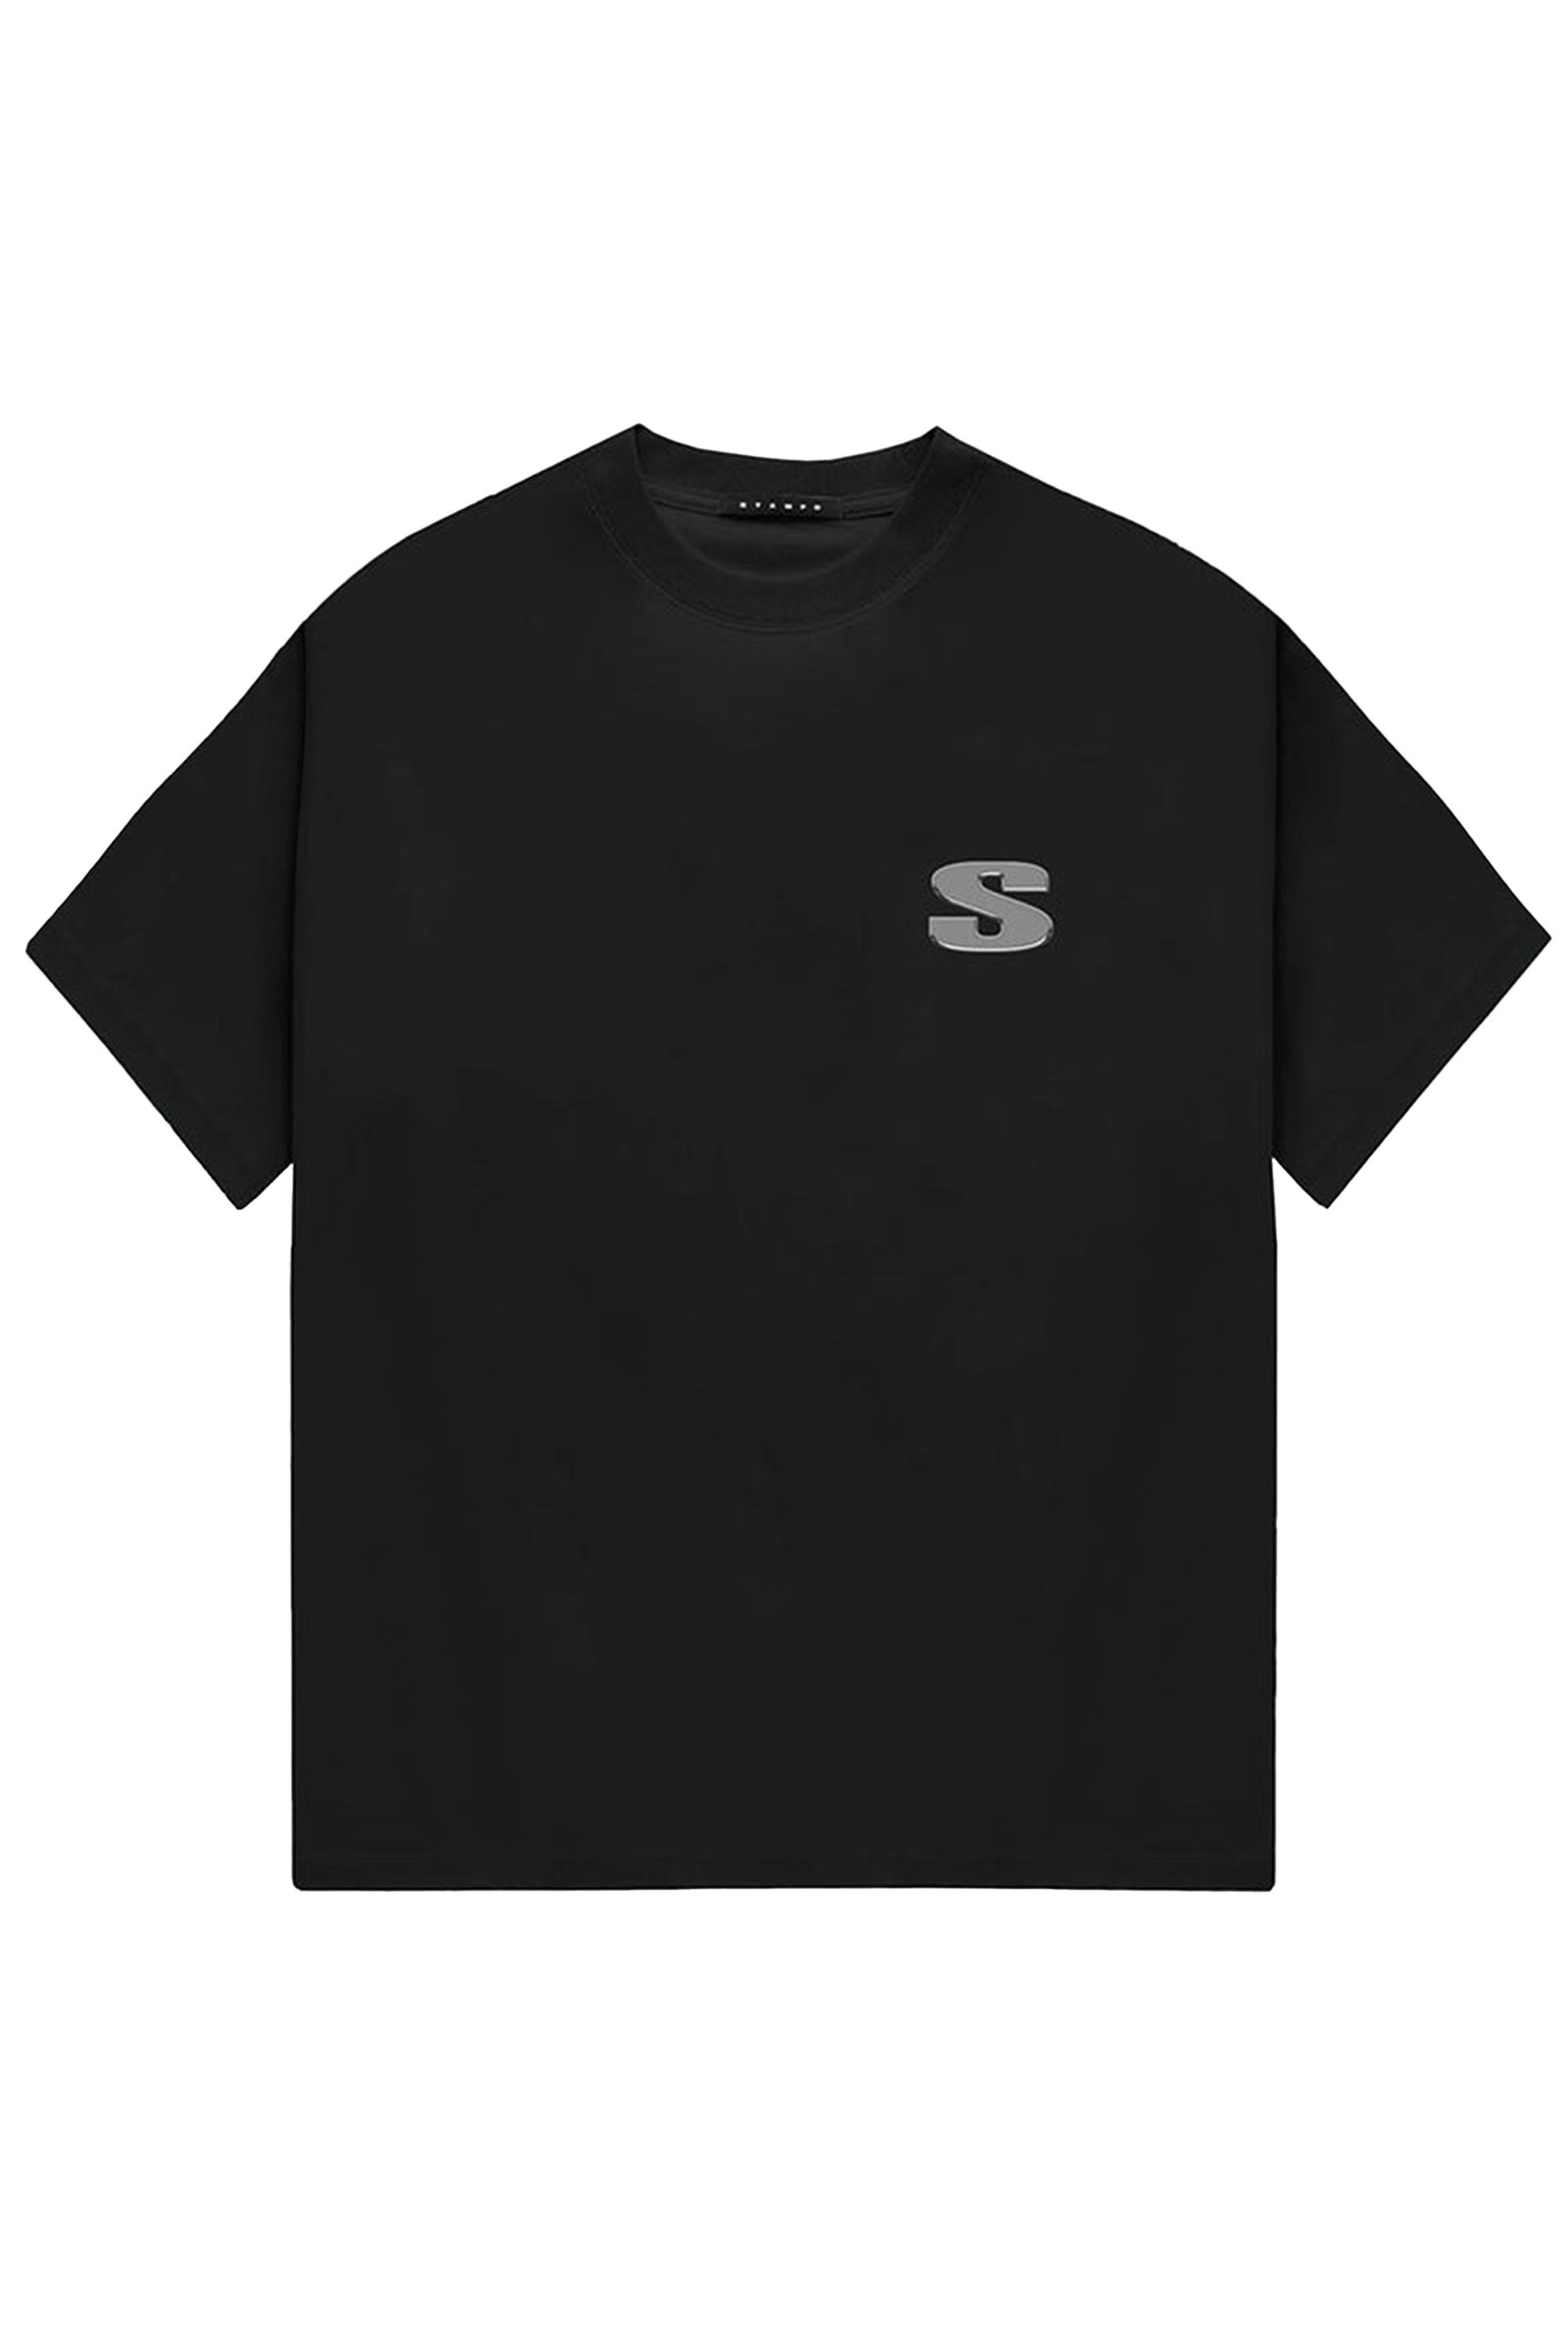 STAMPD スタンプド SS23 CHROME FLAME RELAXED TEE / BLK -NUBIAN